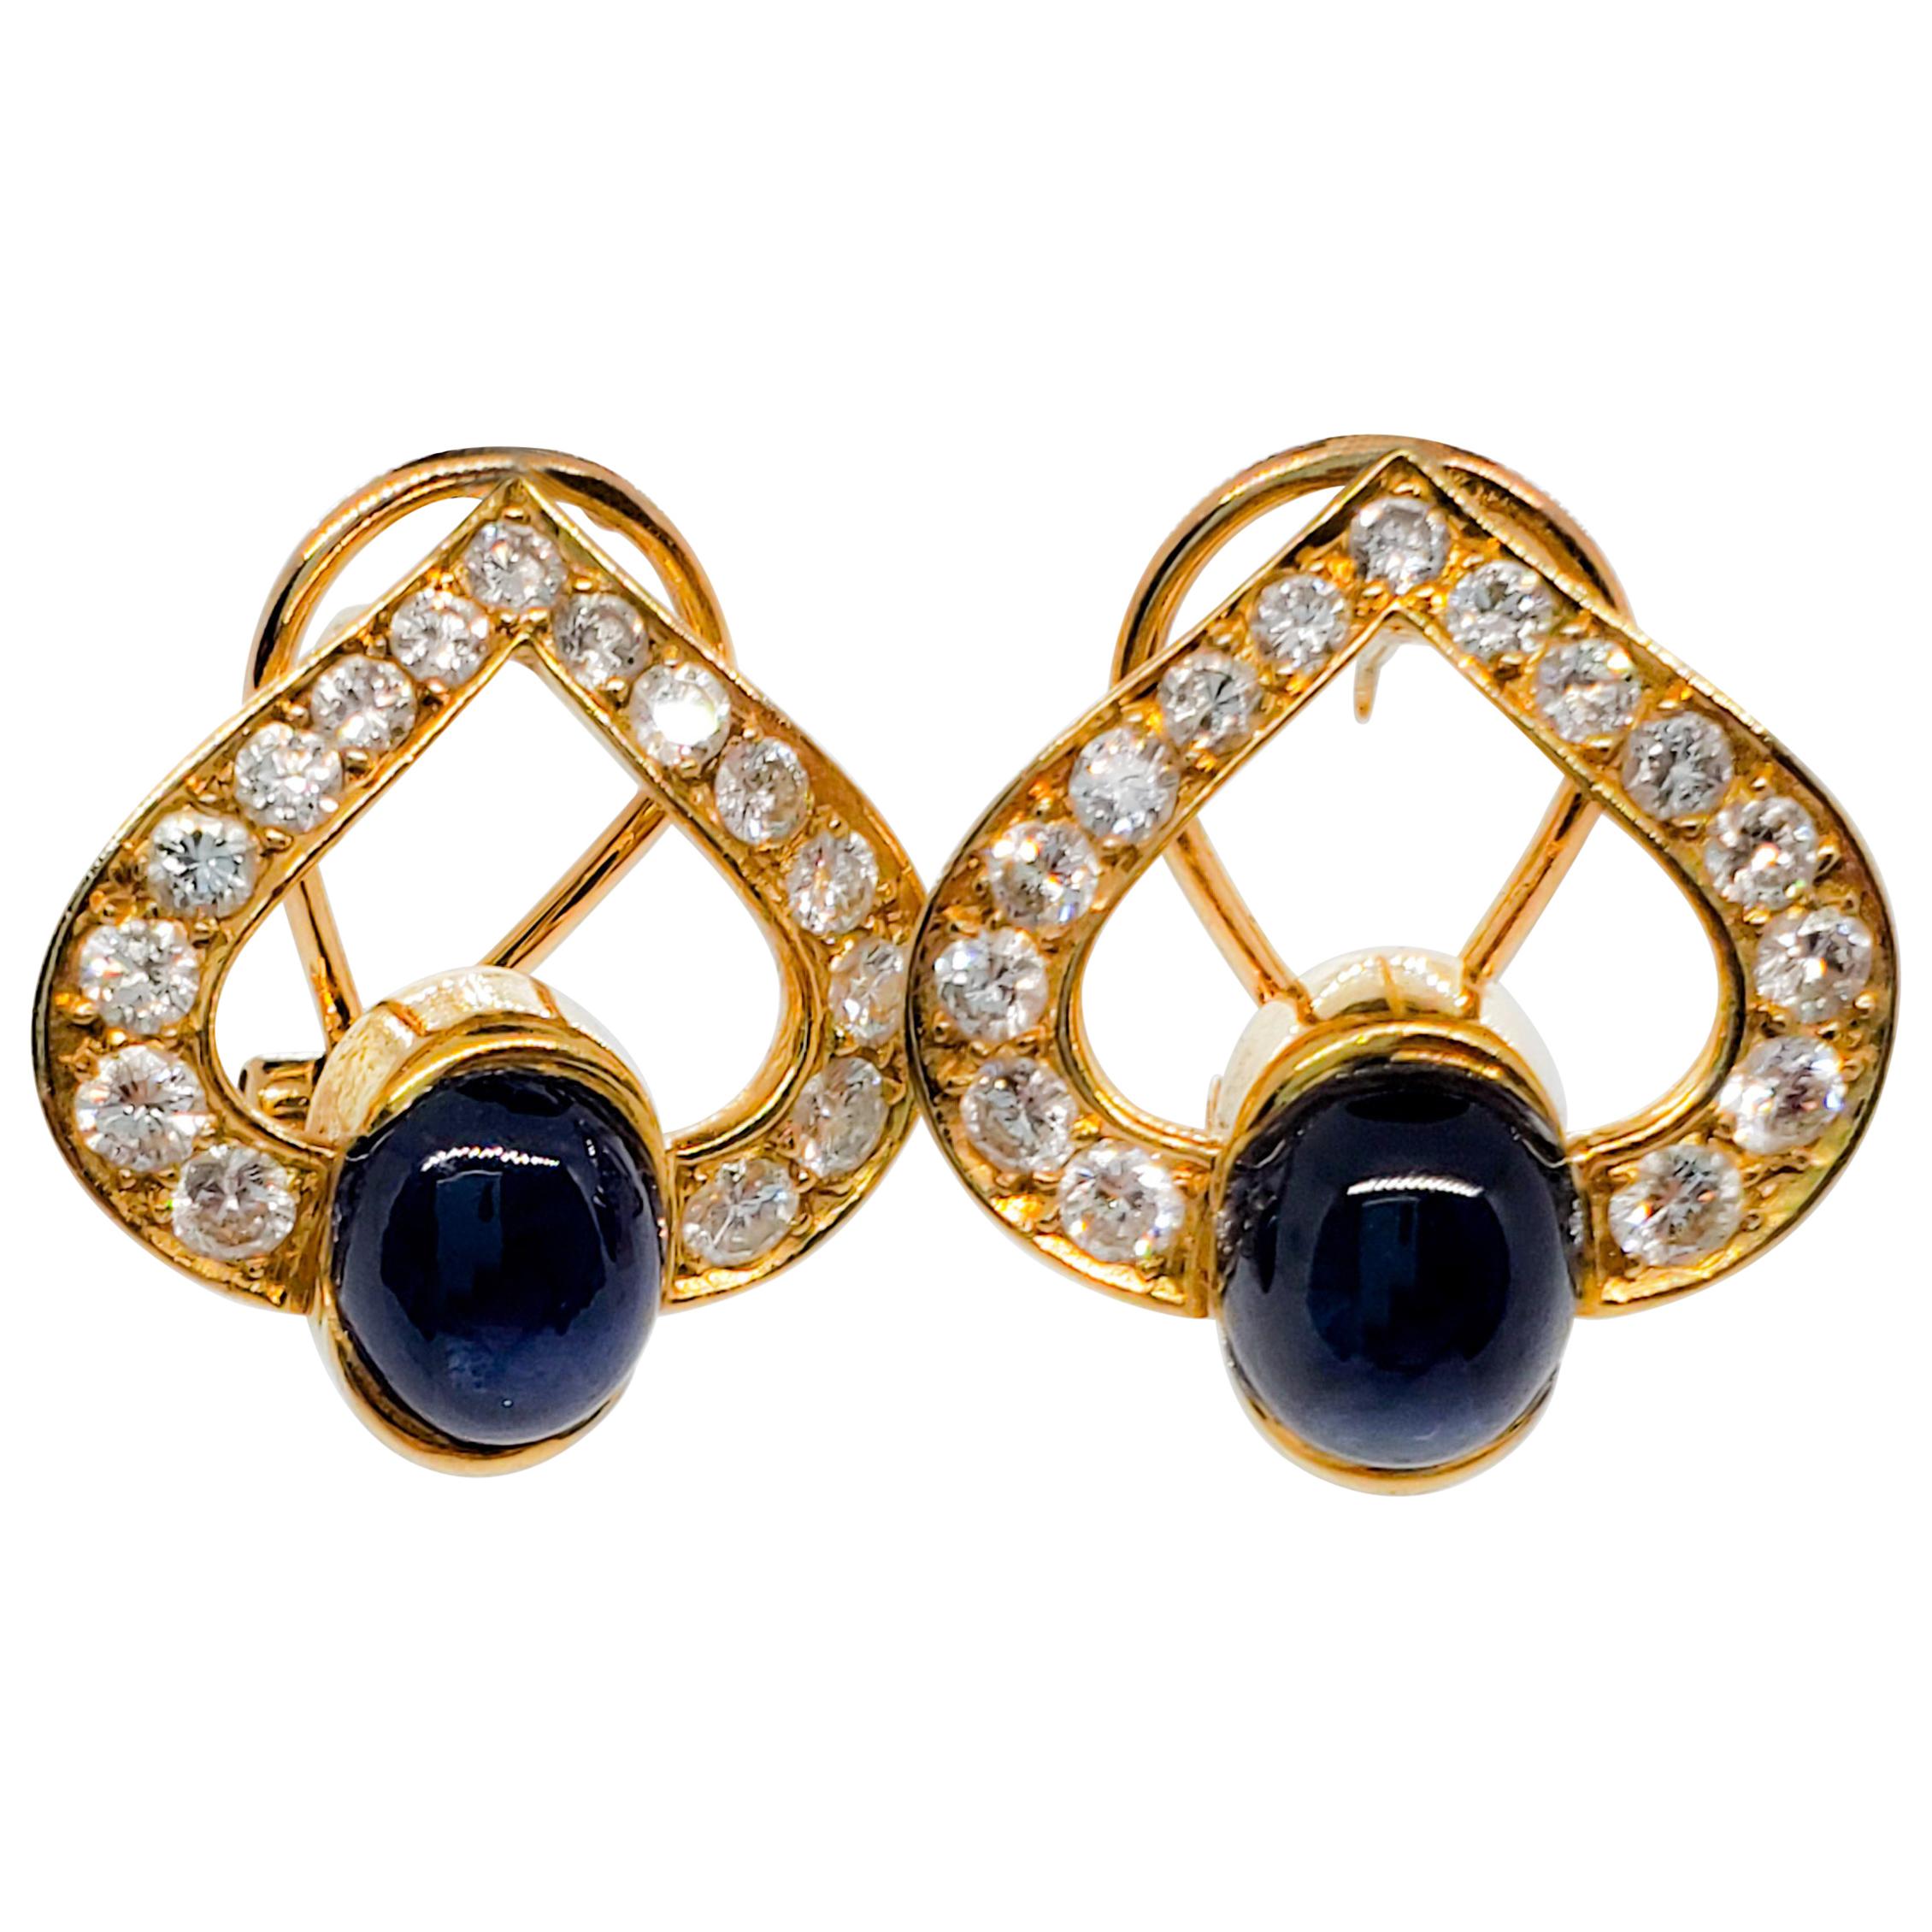 Blue Sapphire Oval Cabochon and White Diamond Earrings in 14 Karat Yellow Gold